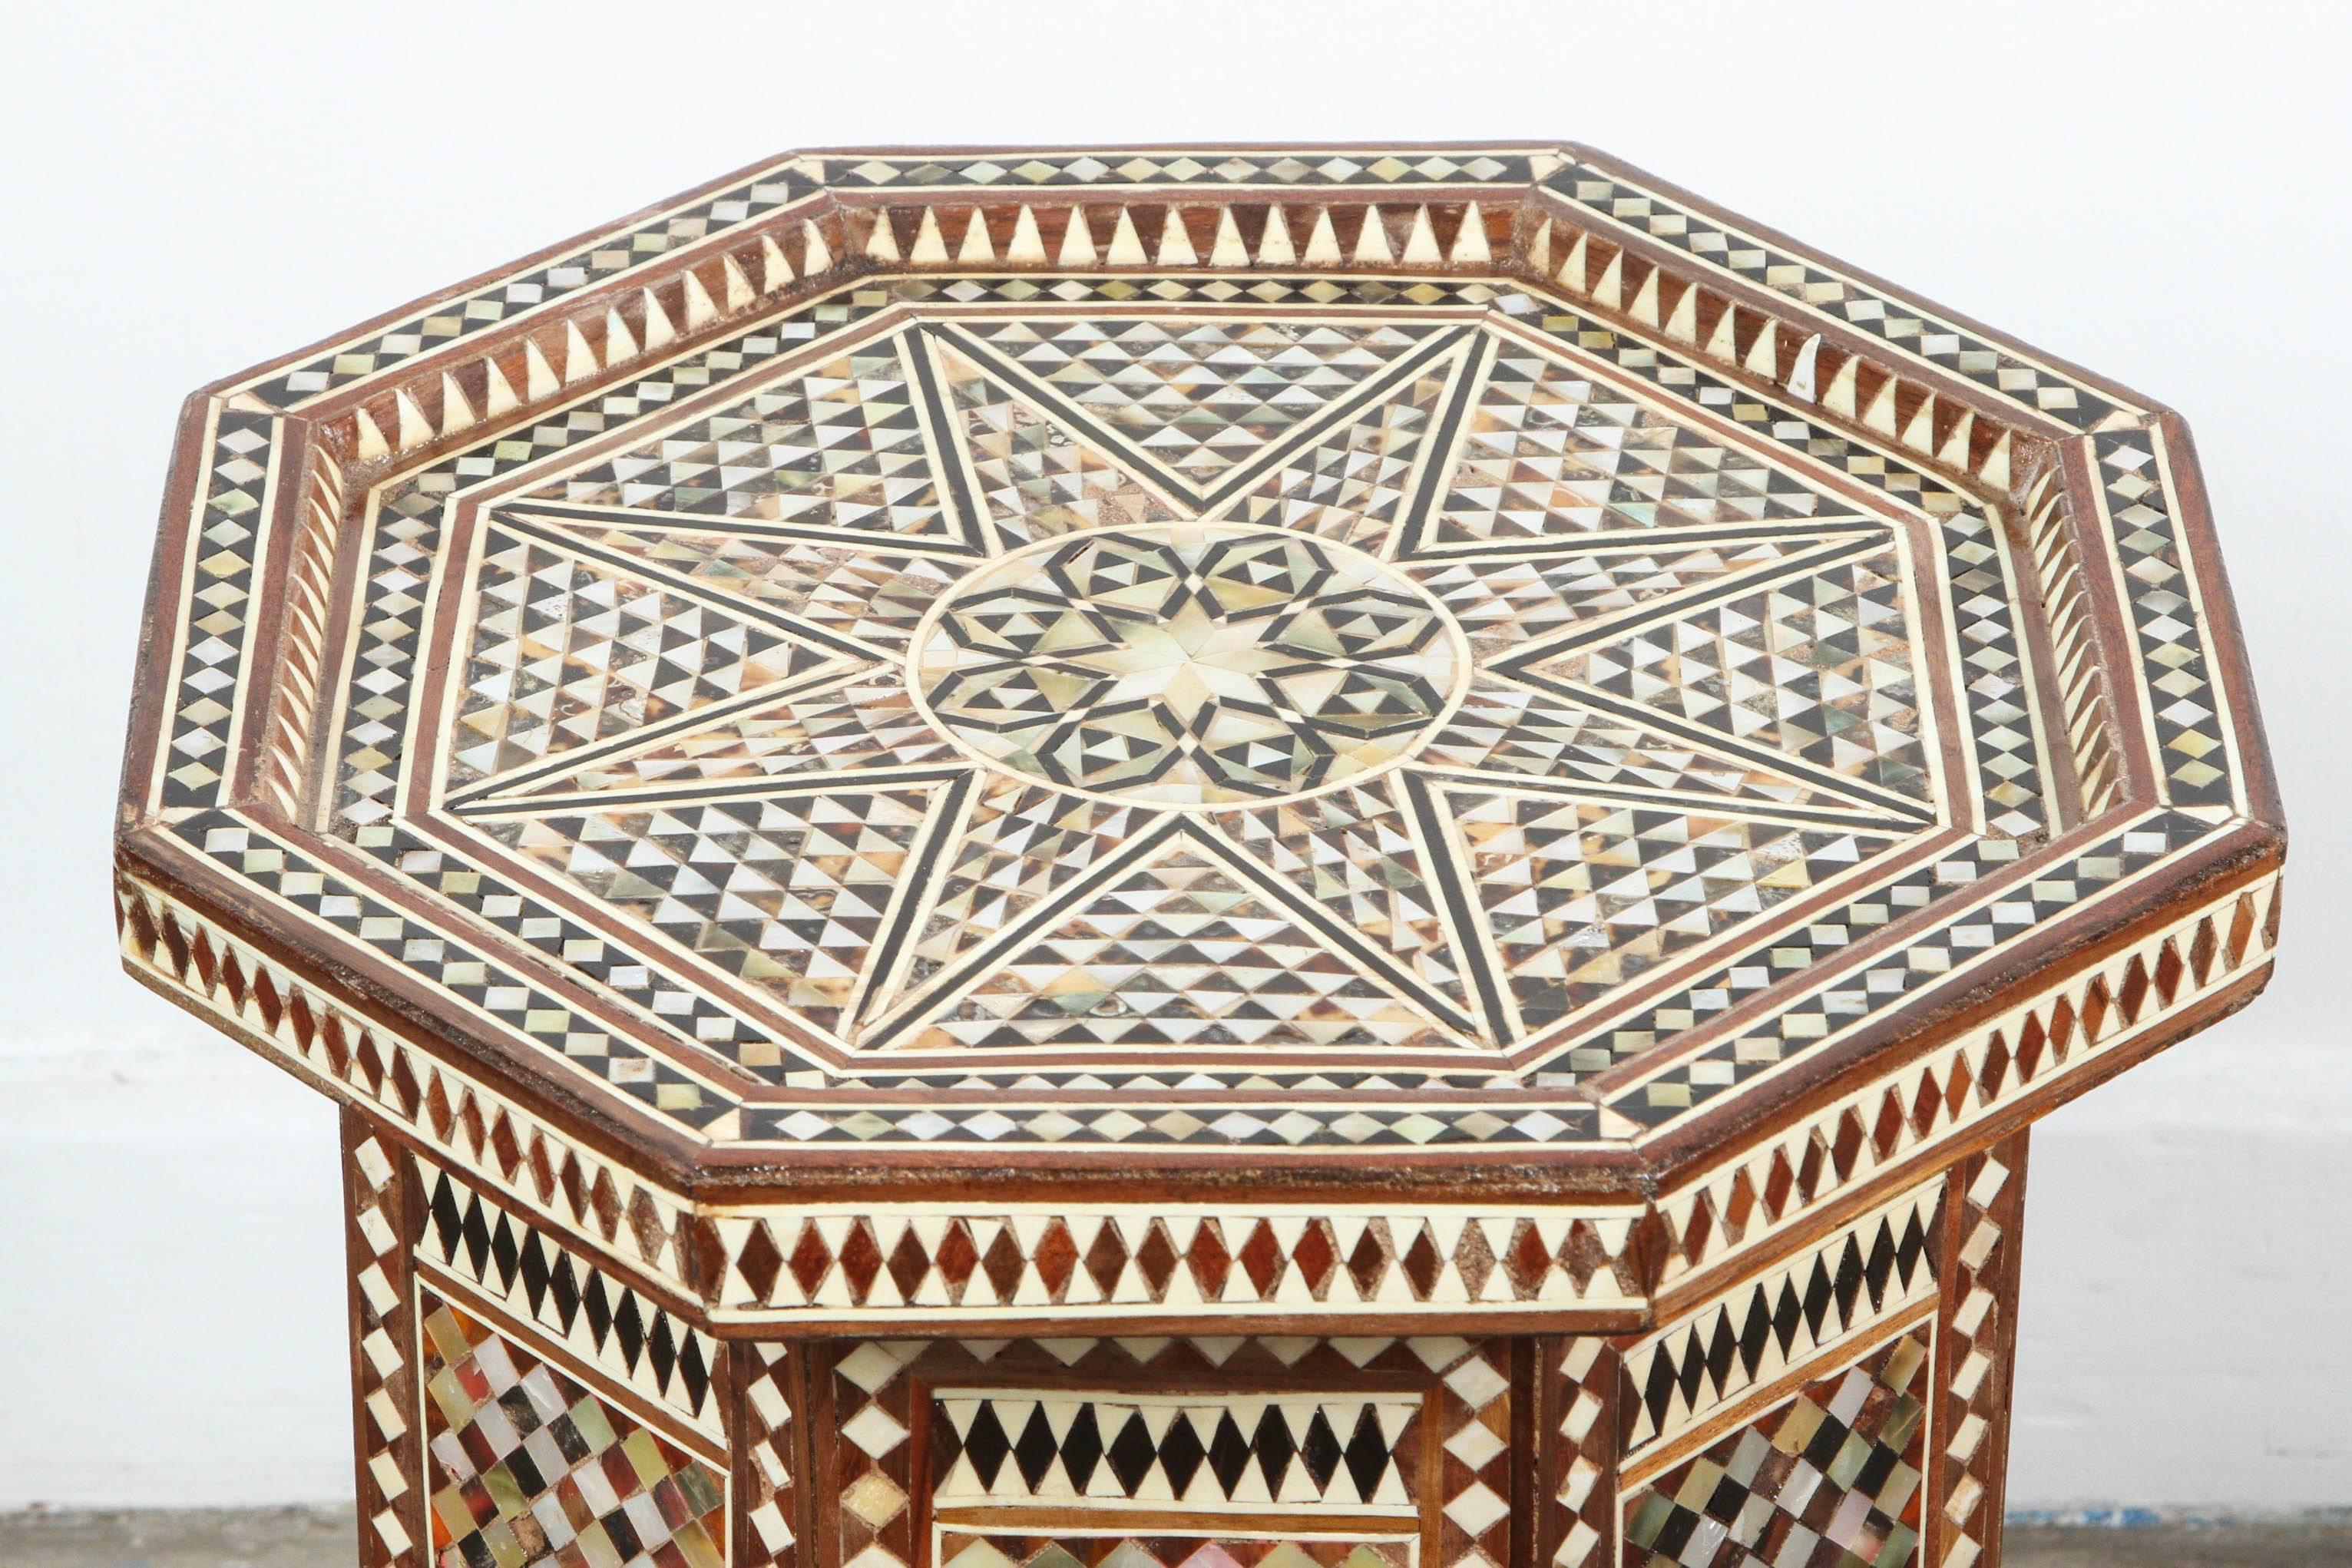 Hand-Crafted Moorish Octagonal Tables Inlay with Mother of Pearl